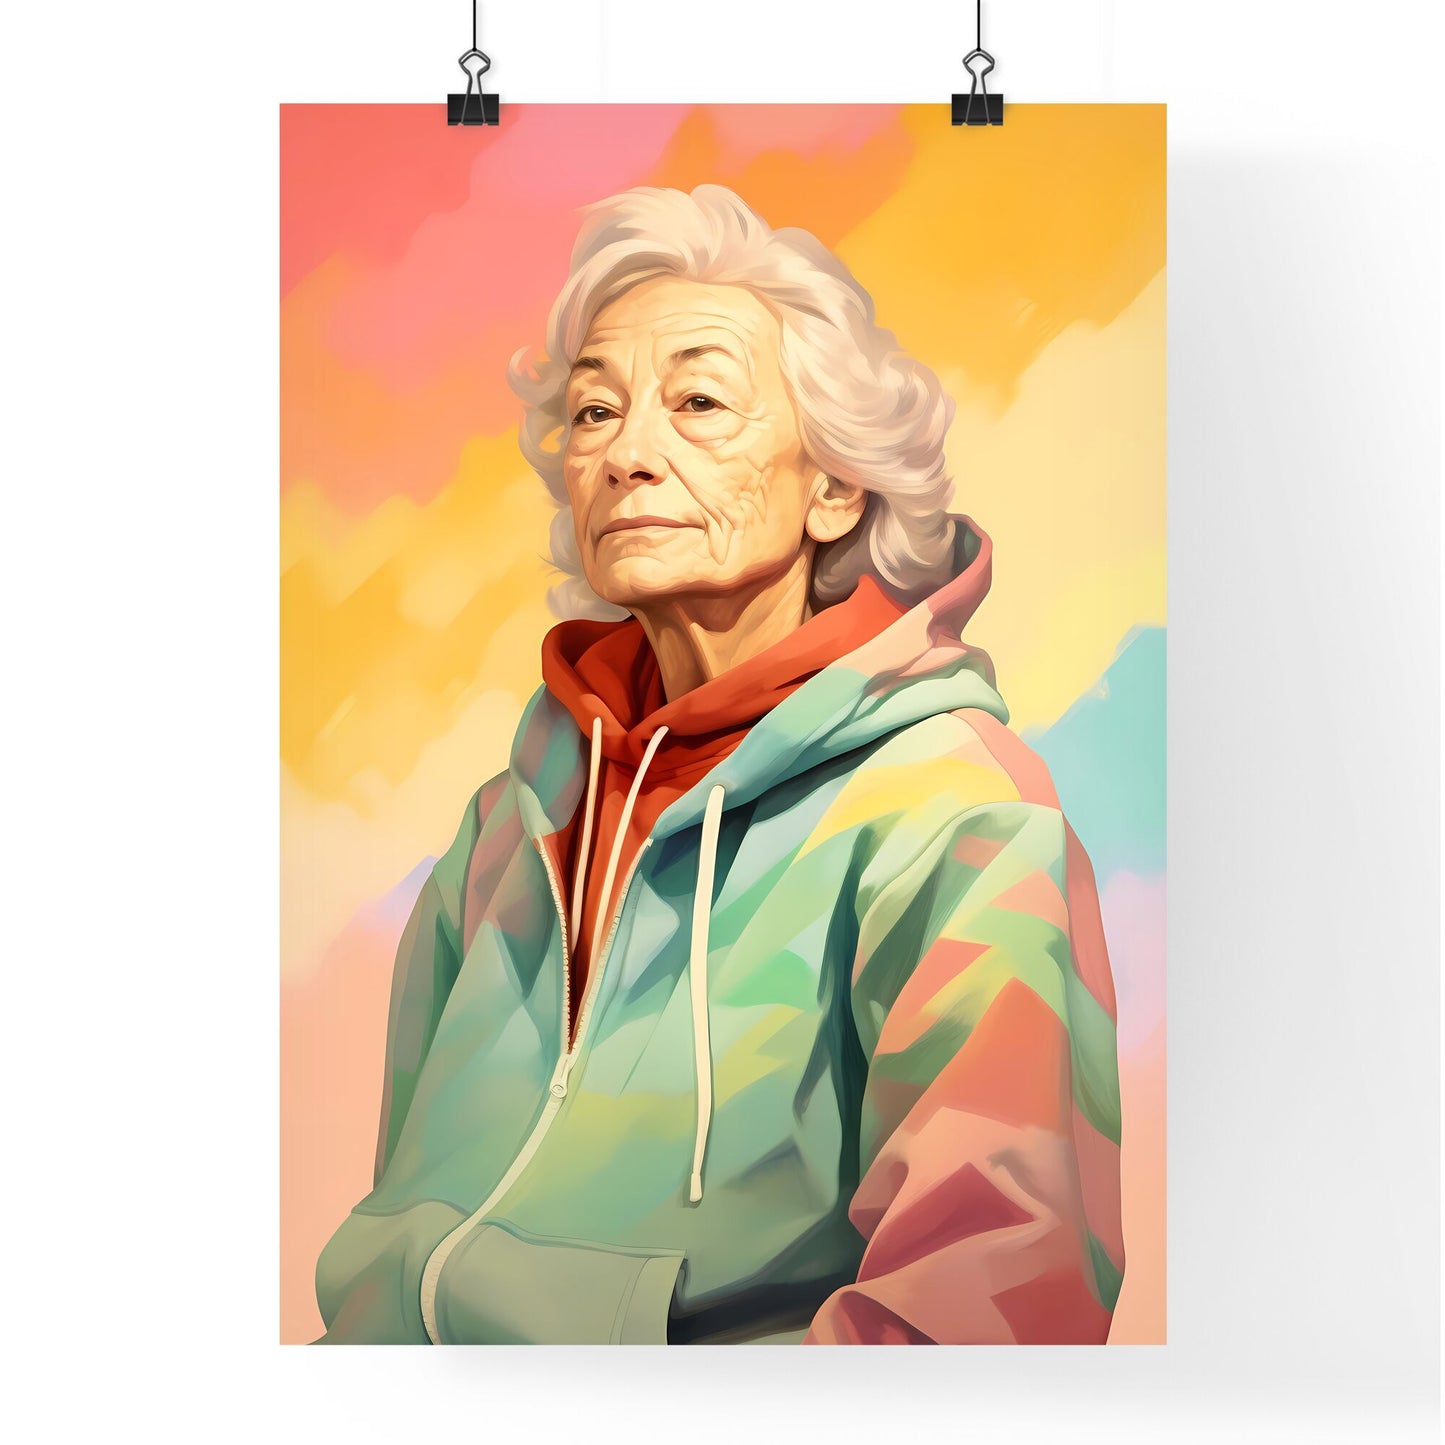 A Poster of Woman in her 70s wearing a stylish hoodie - A Woman In A Colorful Jacket Default Title